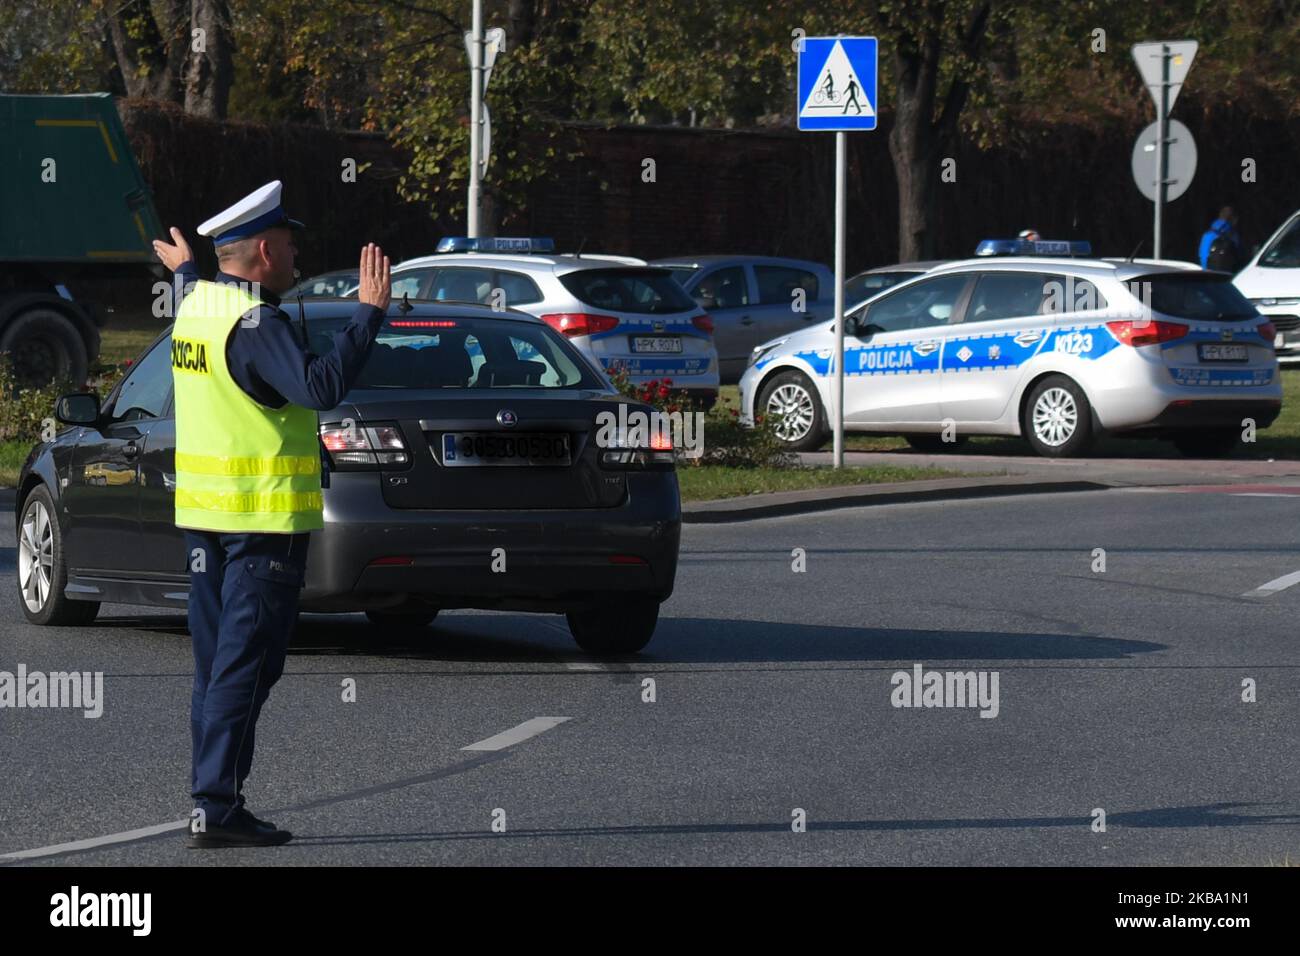 A member of Rzeszow Police managing traffic near Pobitno cemetary. Today, Polish Police Headquarters announced stats for this year's 'Candle 2019 Action' (Polish: Akcja Znicz) - an annual campaign organized during All Saints' Day weekend. 268 road accidents occurred in Poland (31 Oct to 3 Nov). 25 people were killed, 346 wounded, and 1,245 drunk drivers were detained. The number of accidents compared to the same period in 2018 fell by 99. In addition, a year ago there were 23 more casualties and 116 more injuries. However, the number of drunk drivers increased by 205 more. On Monday, 4 Novembe Stock Photo